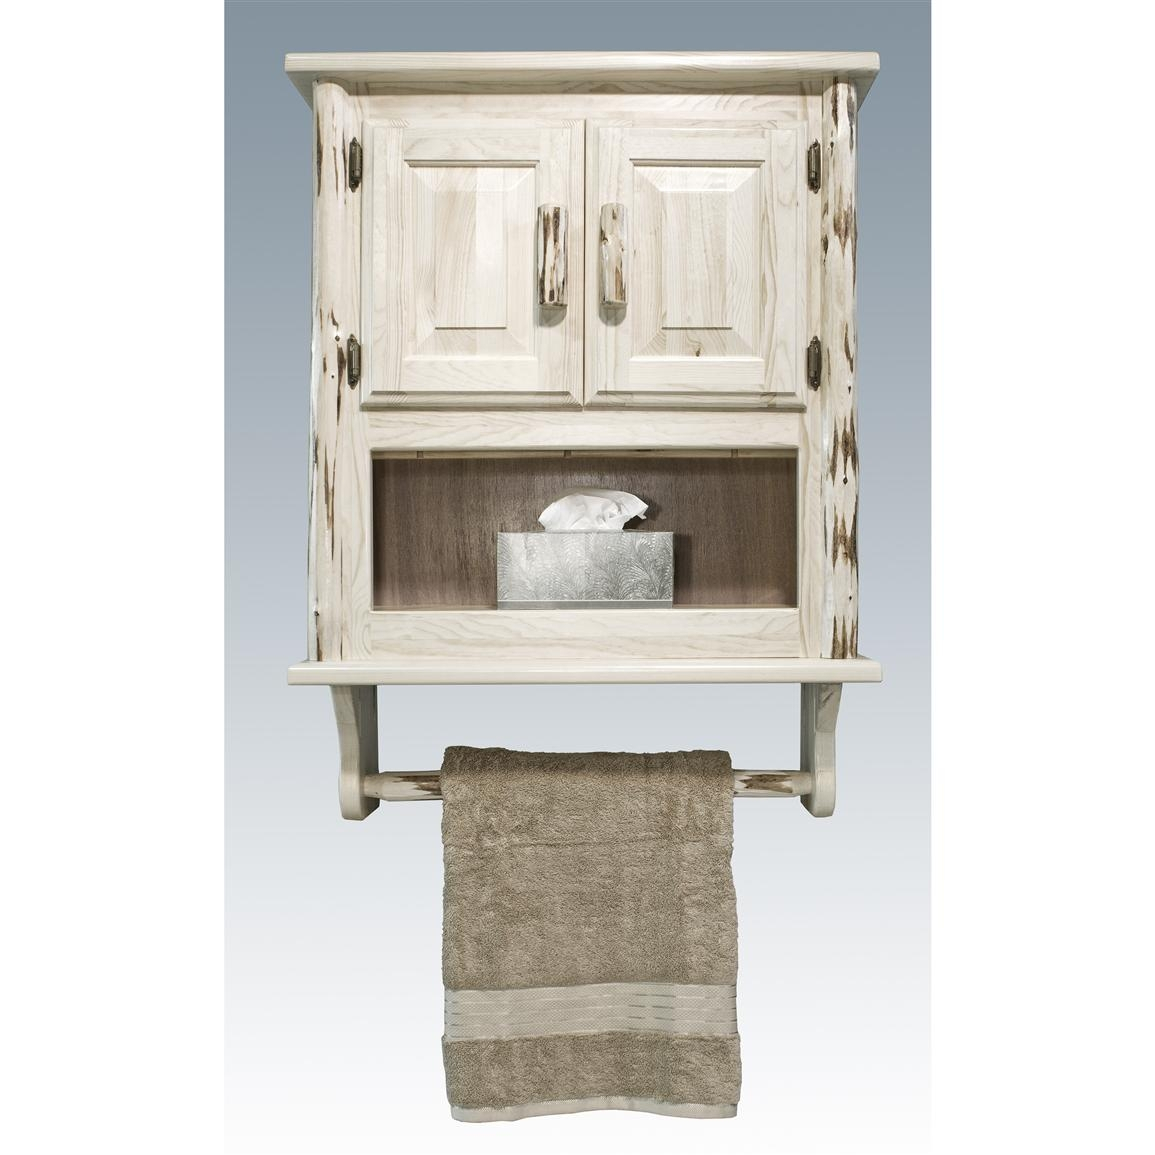 Bathroom Wall Cabinets Rustic Bathroom Cabinets Ideas Cottage Style in measurements 1155 X 1155